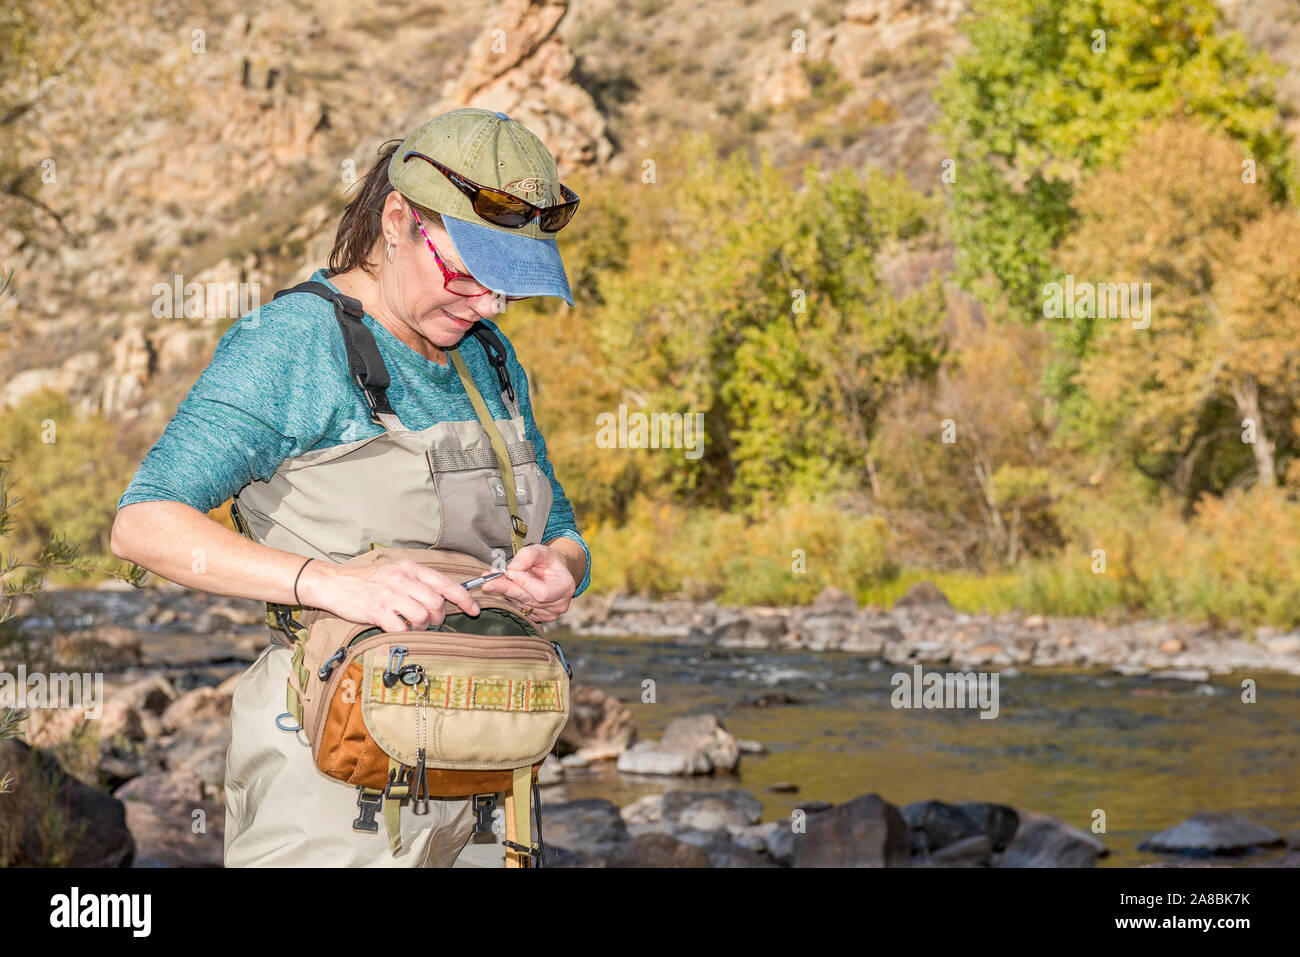 A woman prepares her fishing pole with line and a hook as she